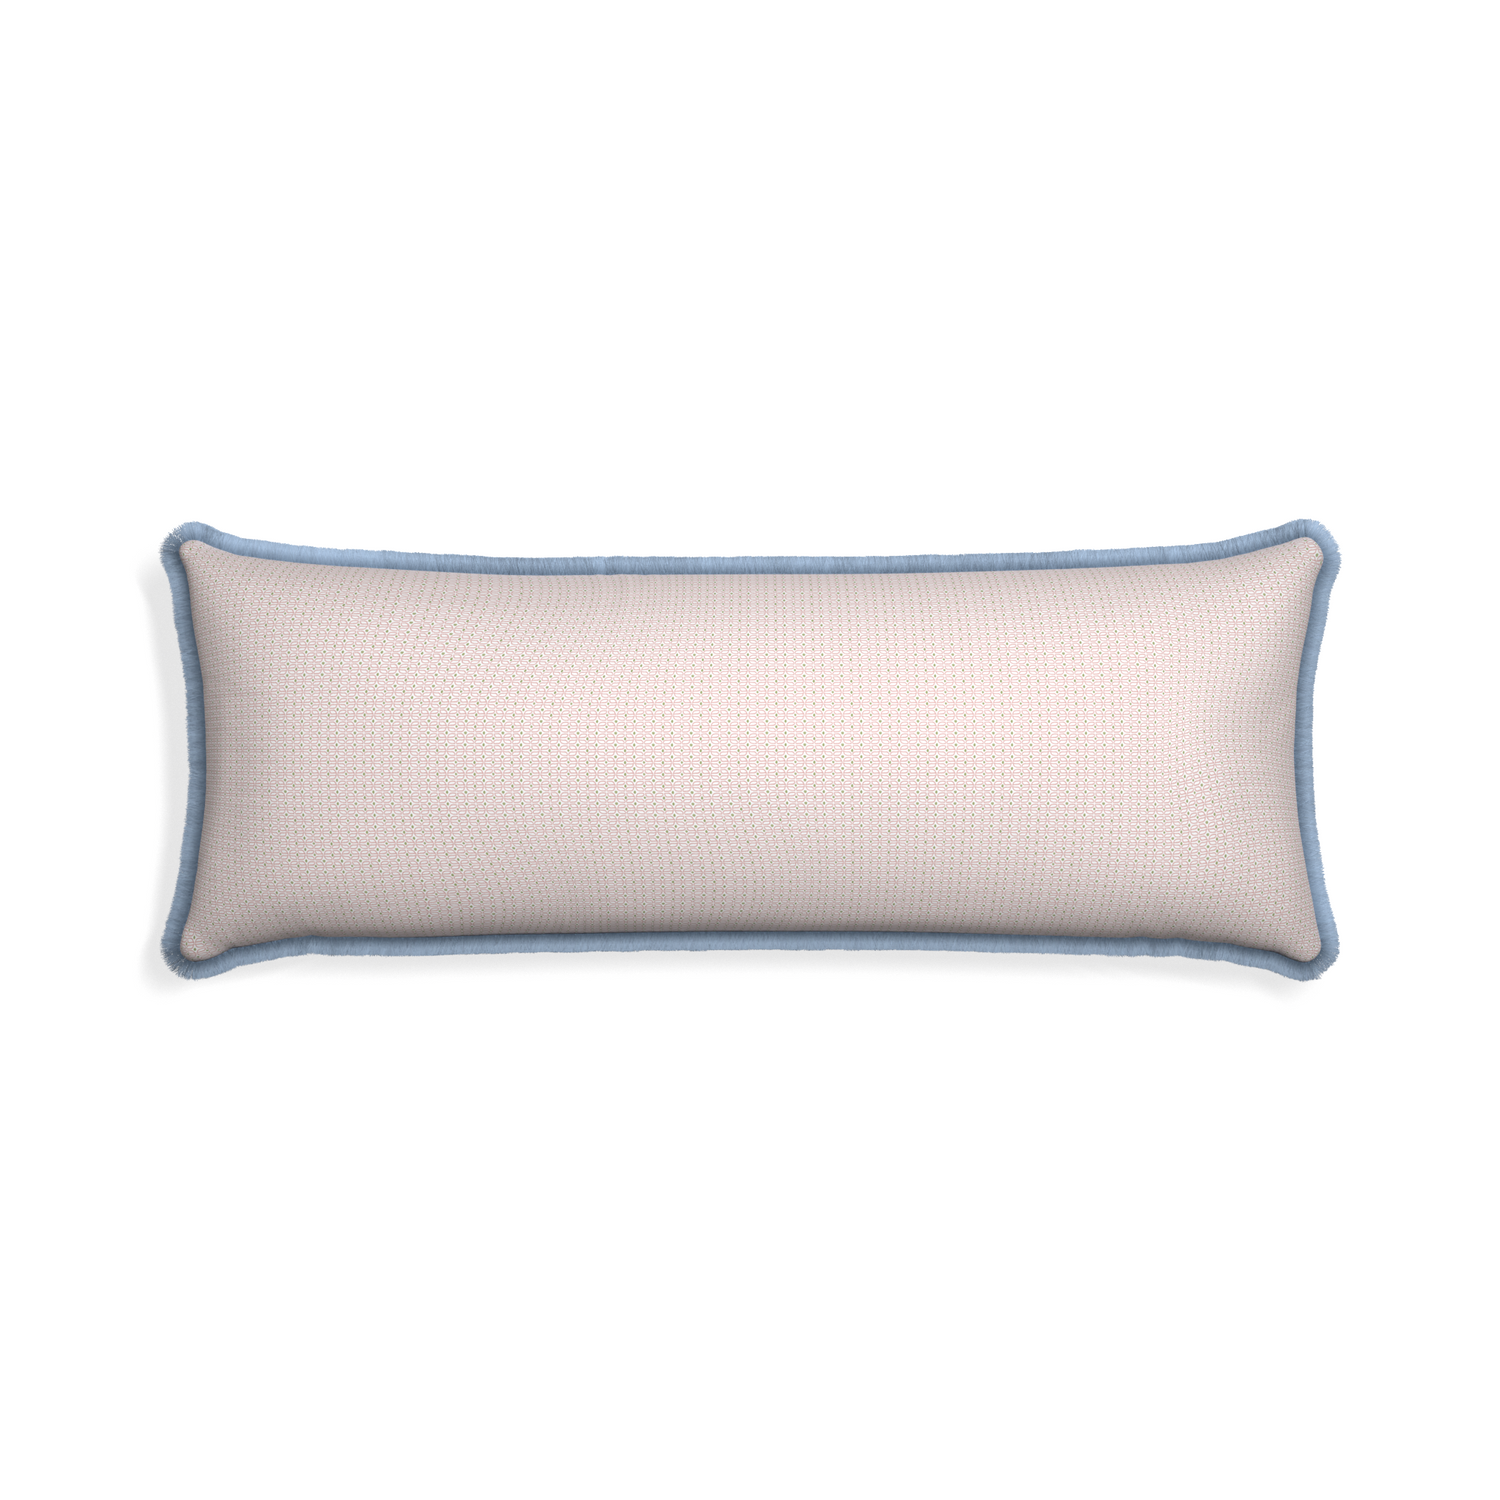 Xl-lumbar loomi pink custom pink geometricpillow with sky fringe on white background